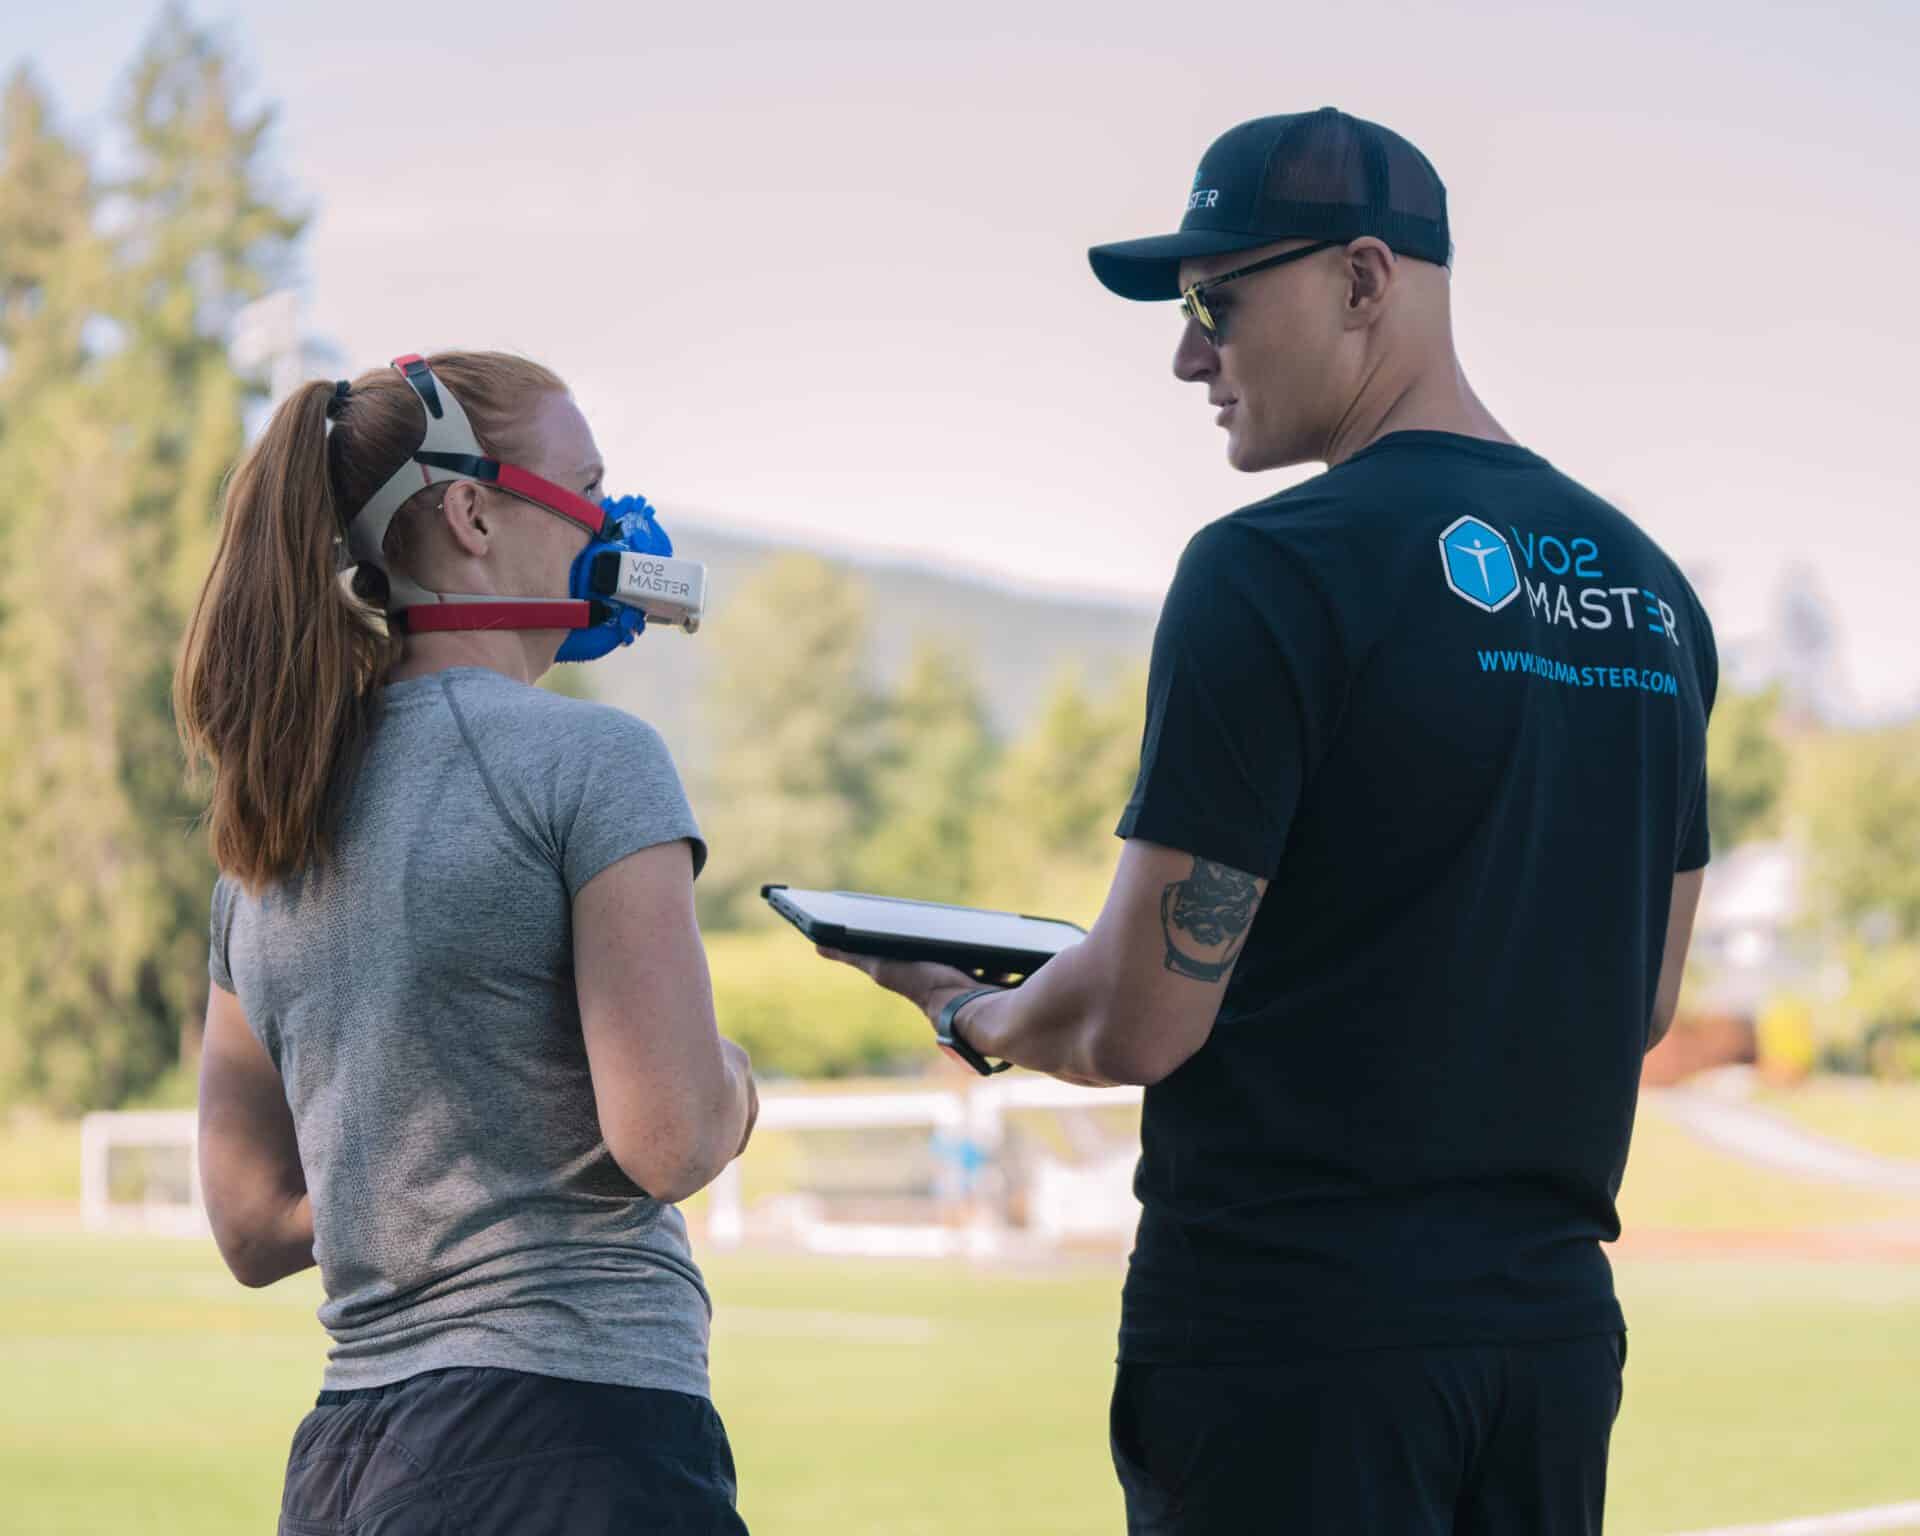 Man wearing VO2 Master merch, showing the testing app on an iPad to a athlete client